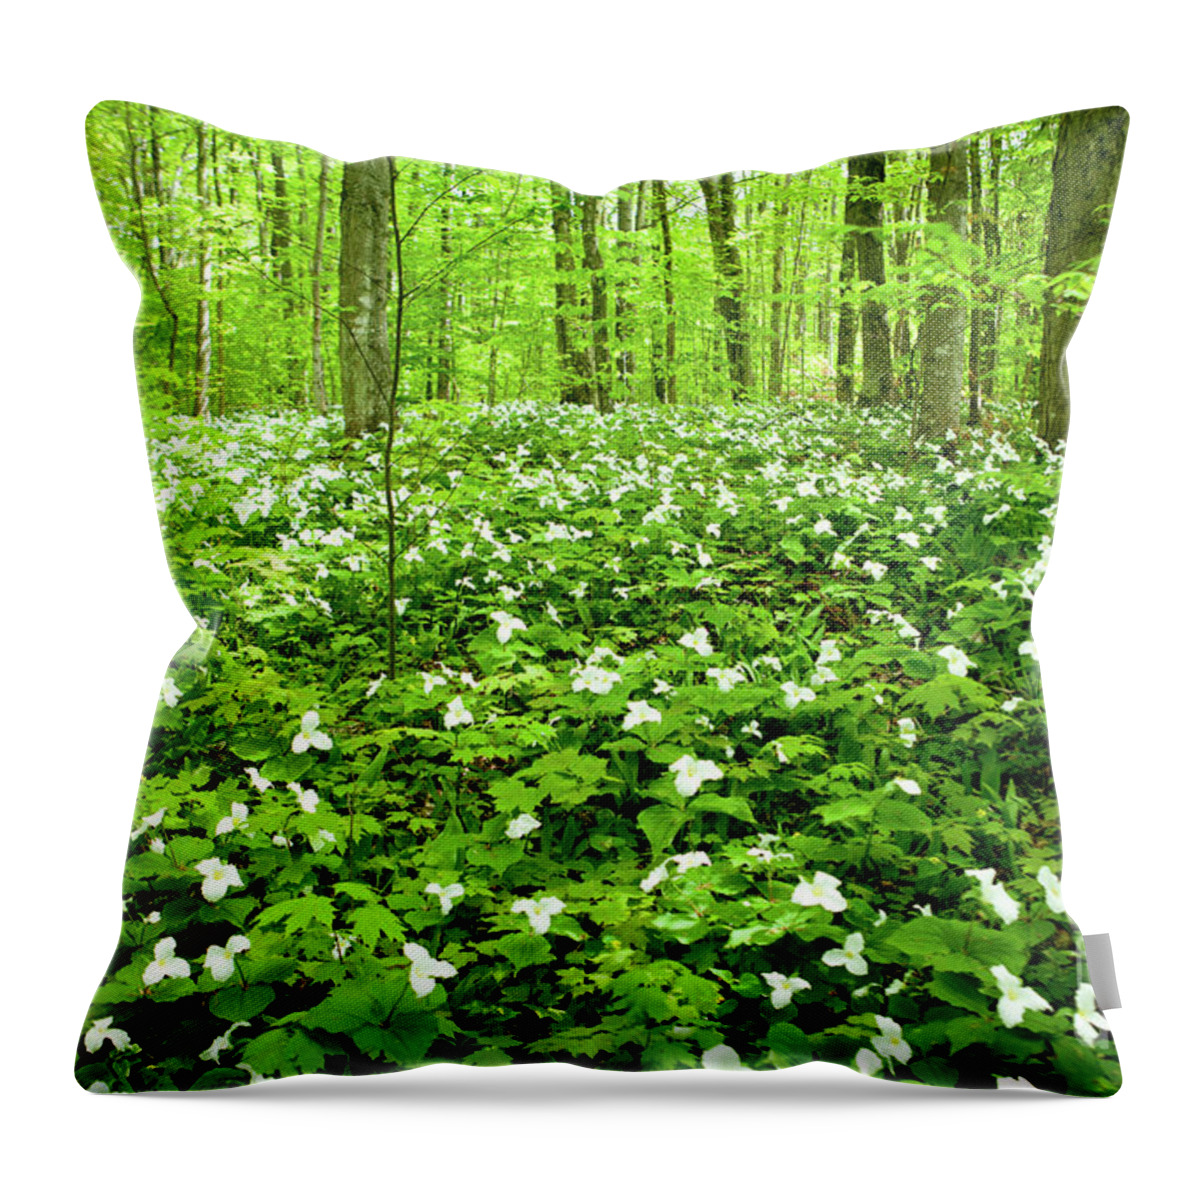 Trillium Throw Pillow featuring the photograph Trillium Field by Rich S